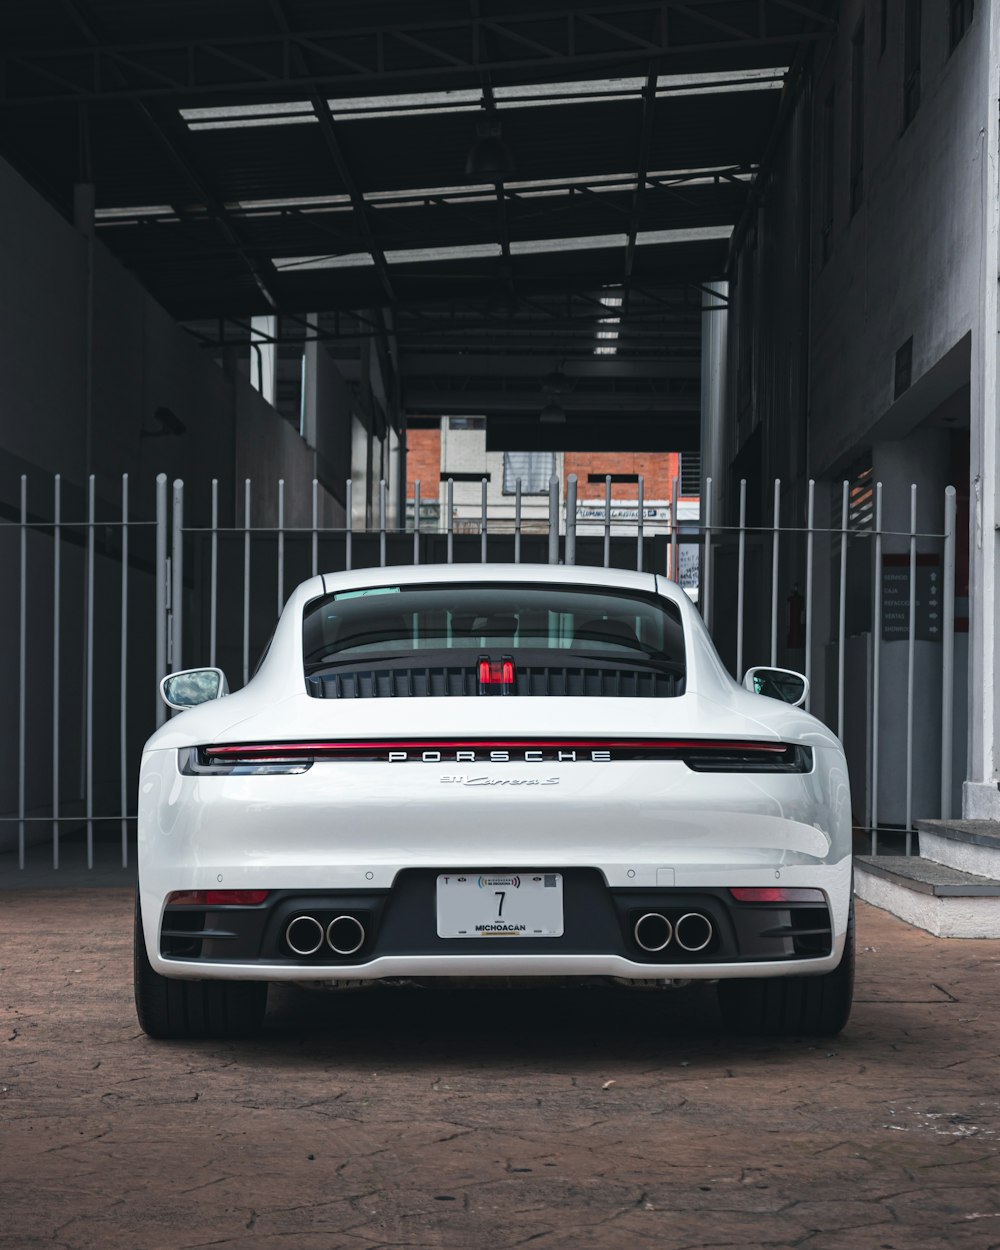 white porsche 911 parked in front of building